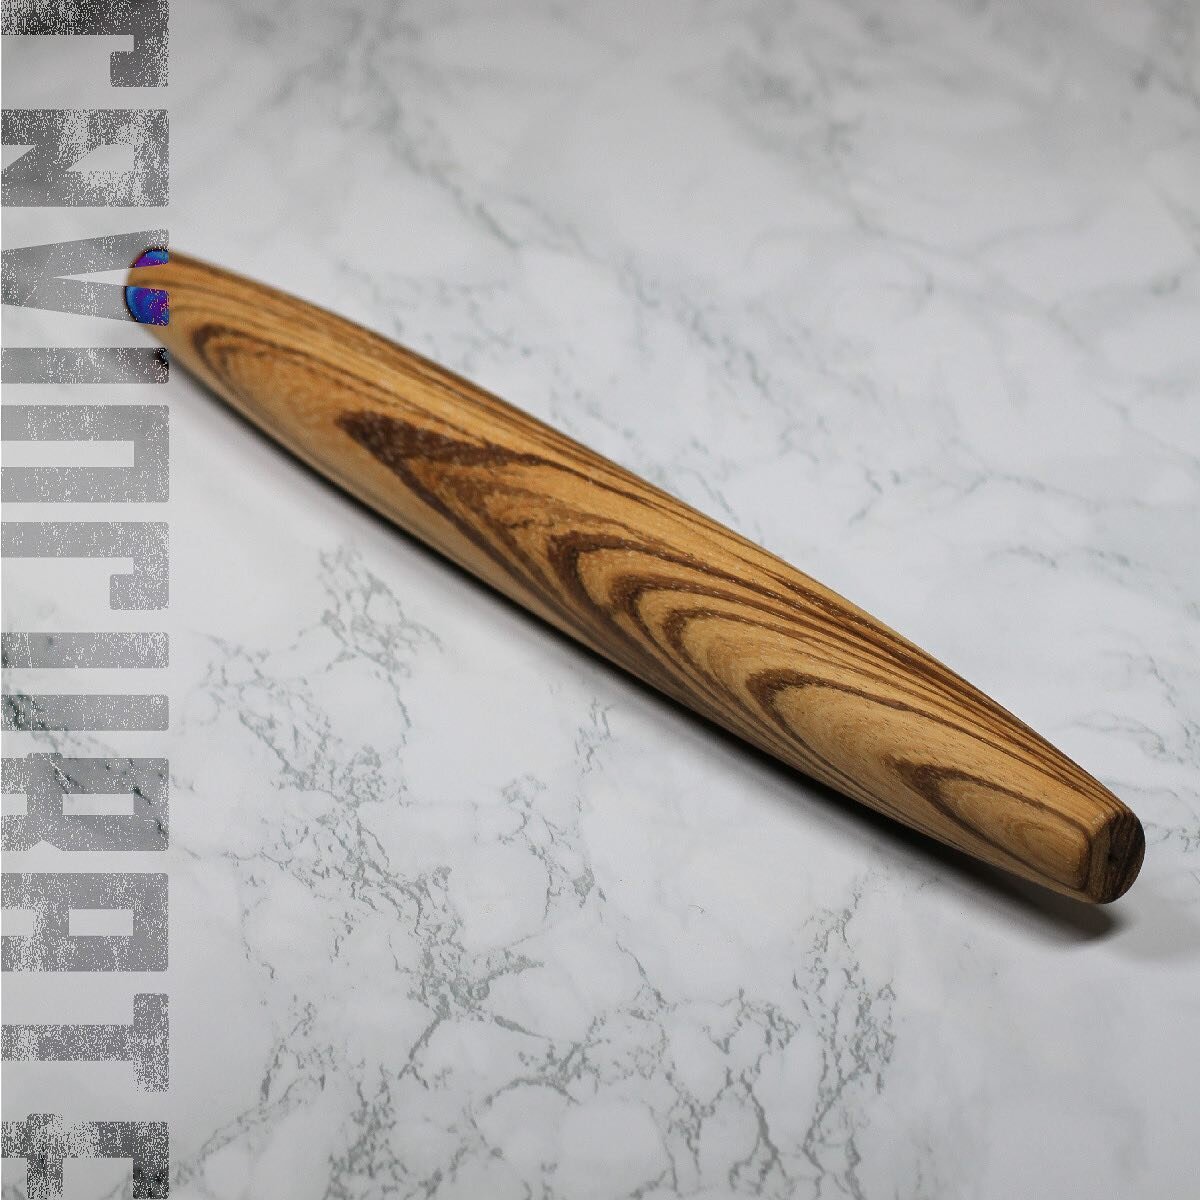 For a lot of us, this pandemic&nbsp;has sparked a little extra experimentation in the kitchen. With new recipes, comes the need for new tools. We've been testing out some new tools we've made for ourselves, like this cut of zebrawood which we turned&